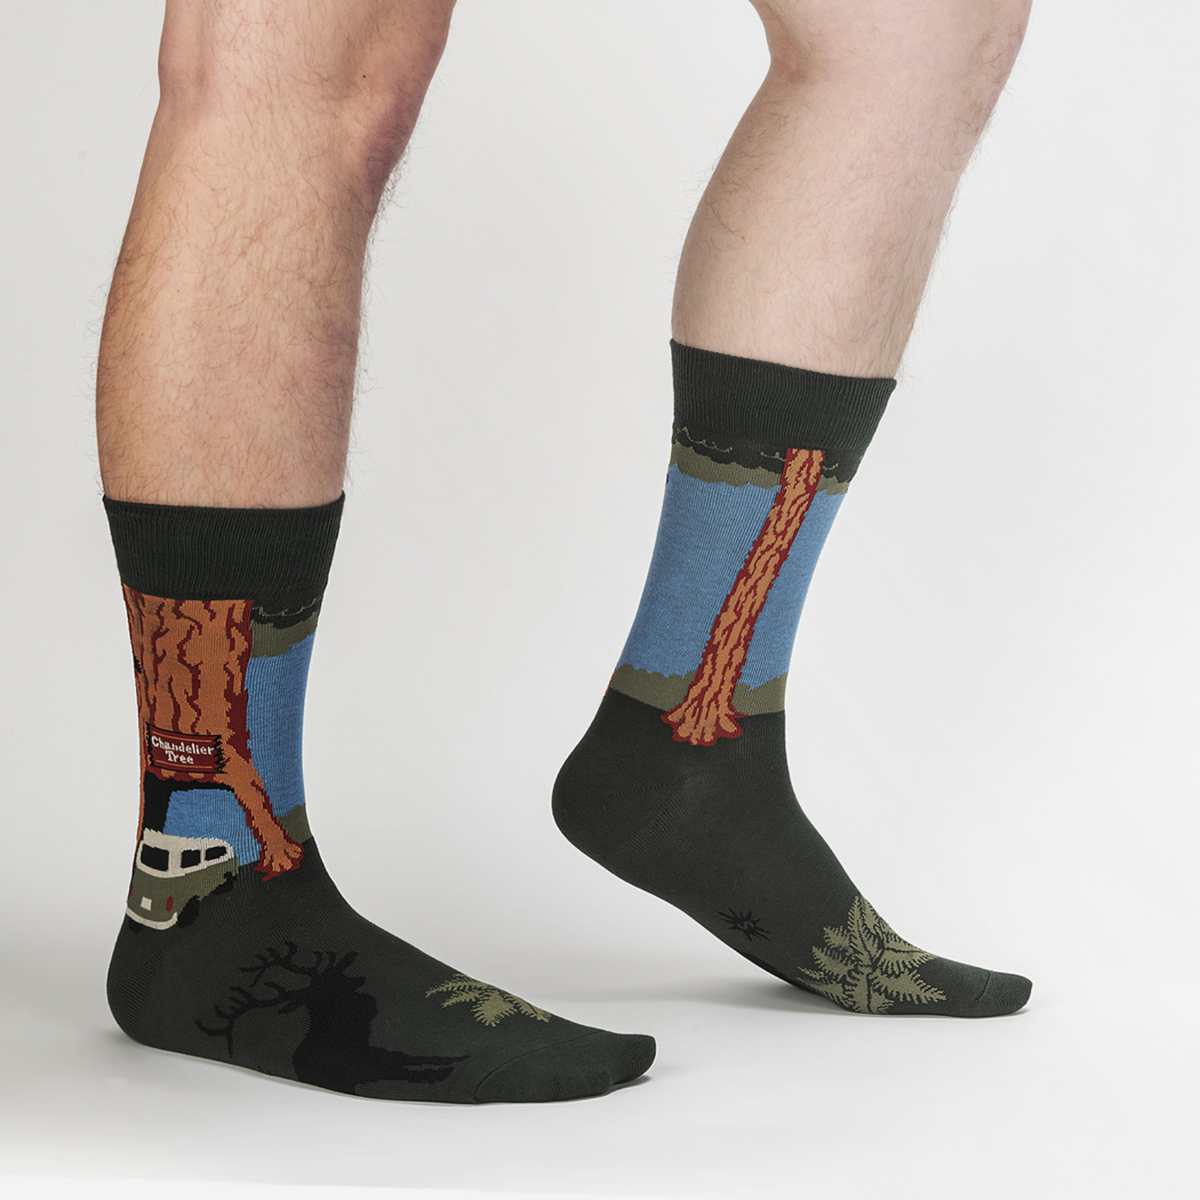 Sock It To Me Redwoods women&#39;s and men&#39;s sock featuring VW Van driving through Chandelier Tree redwood worn by male model from side